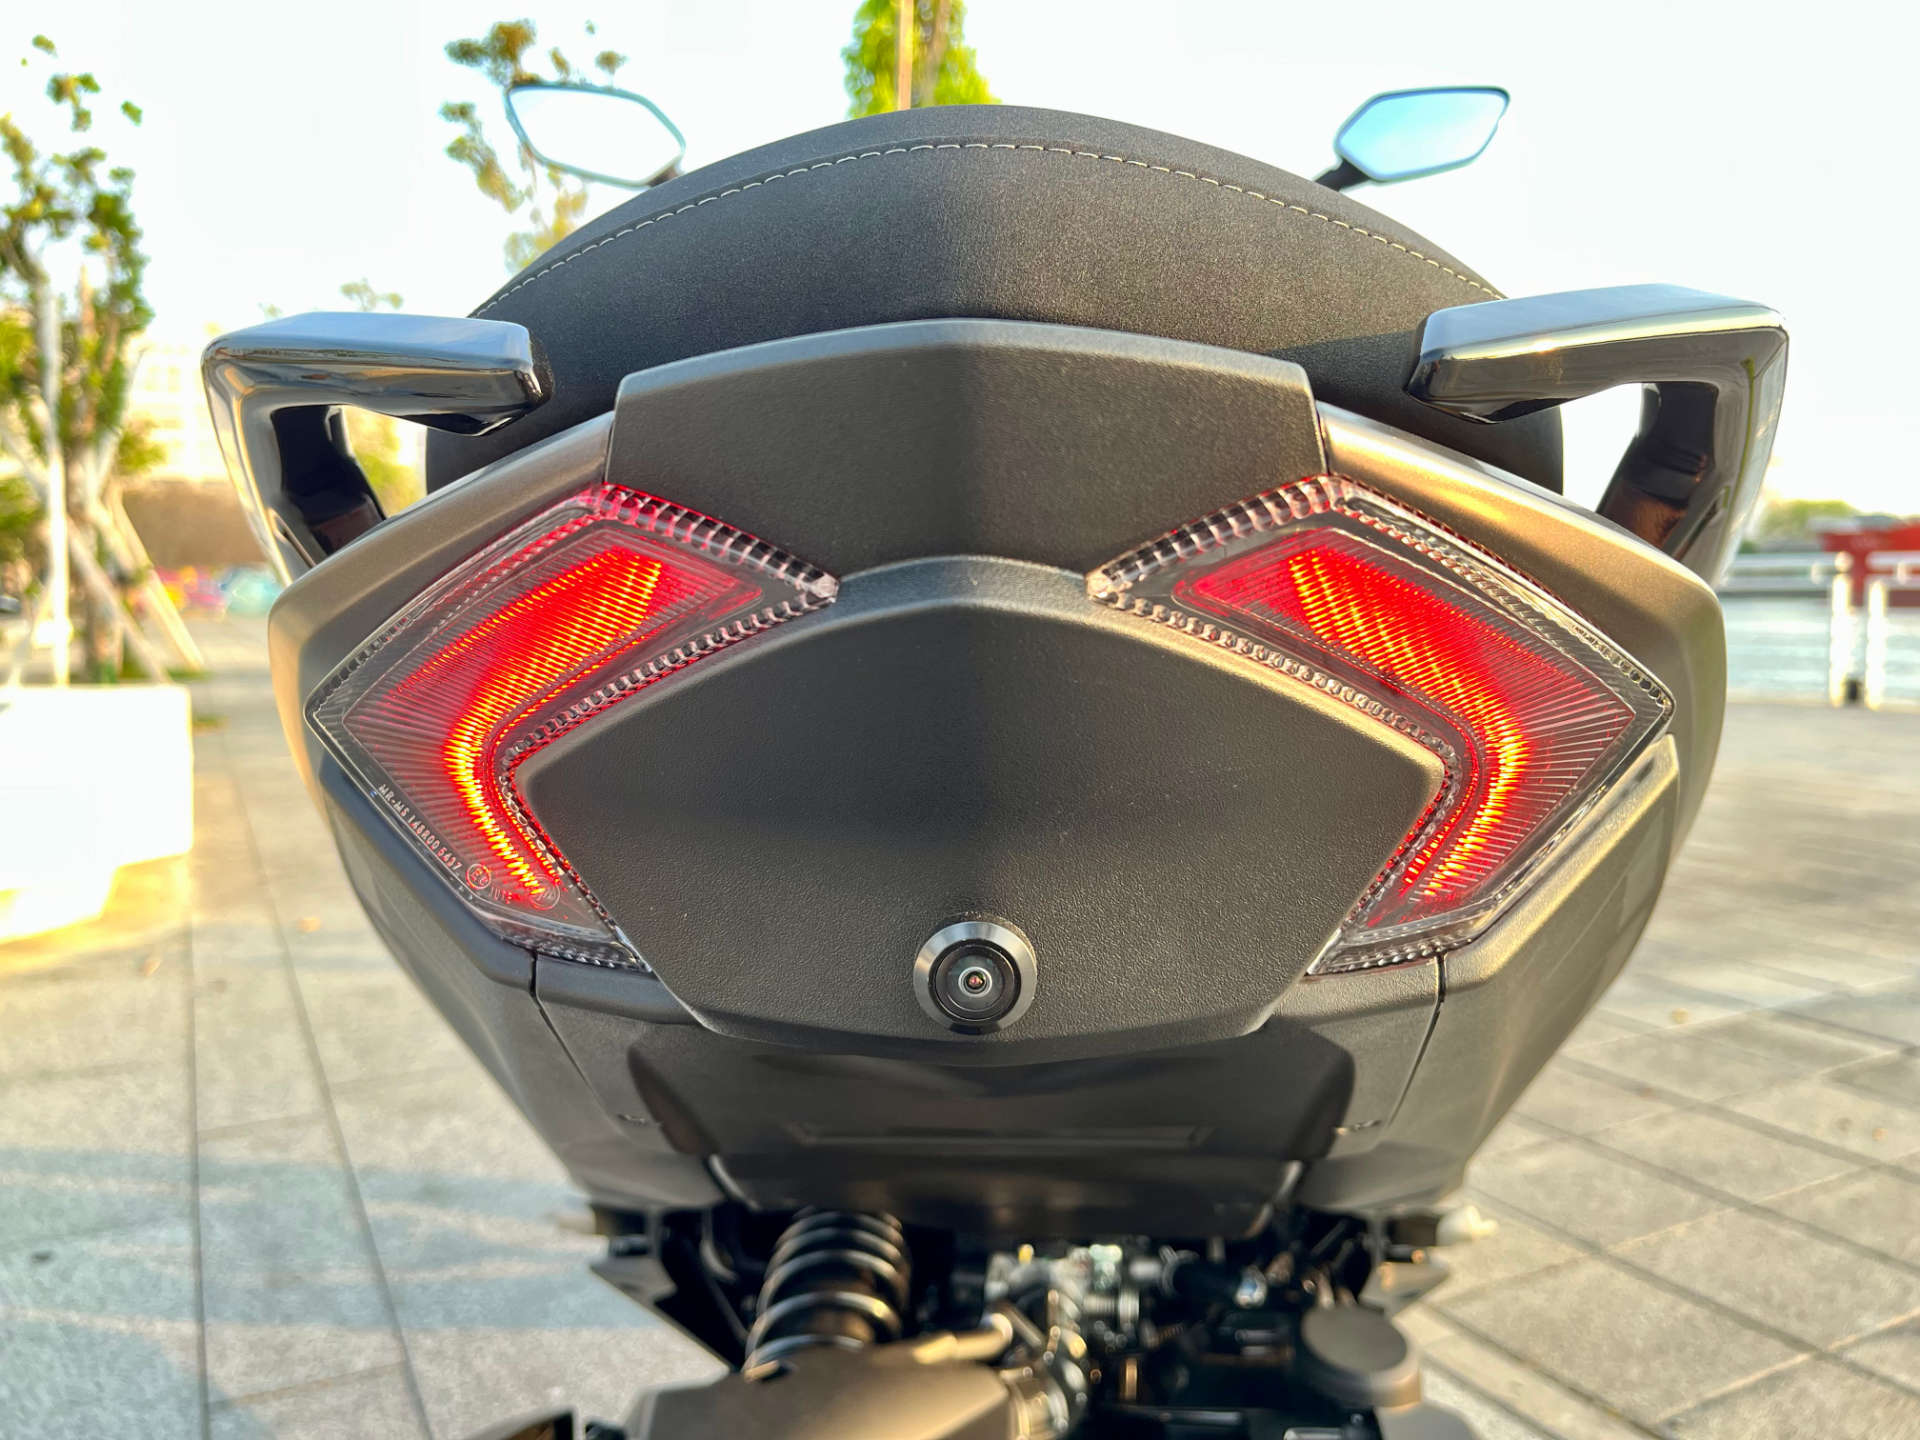 Close-up of the rear dashcam camera and rear lights on an SYM MMBCU scooter.